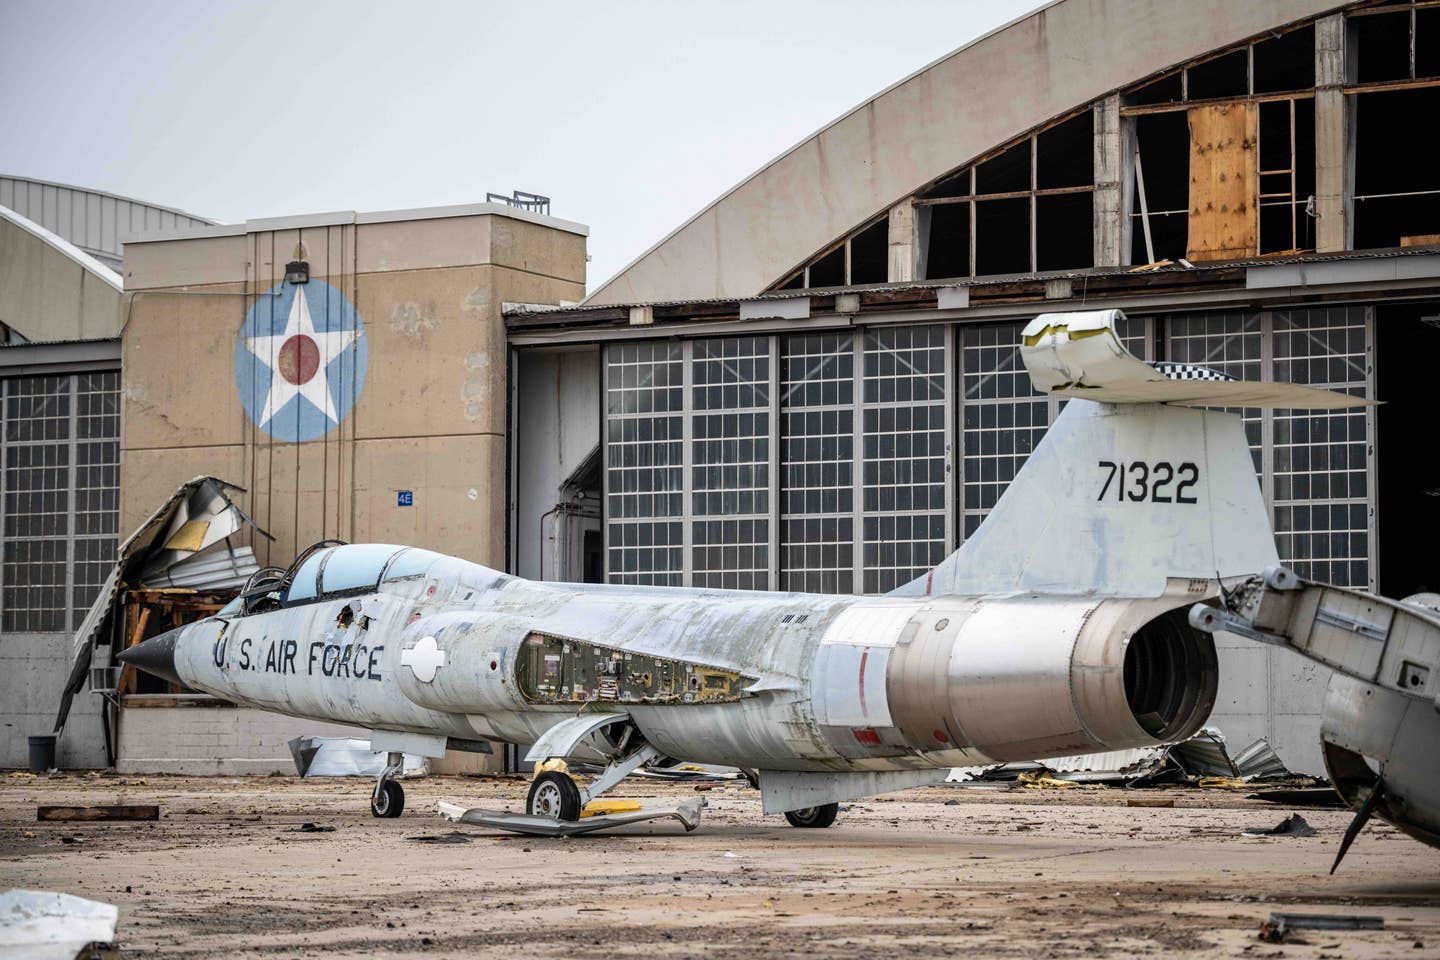 F-104 Starfighter seen outside the hangar. <em>Wright-Patterson AFB image</em>